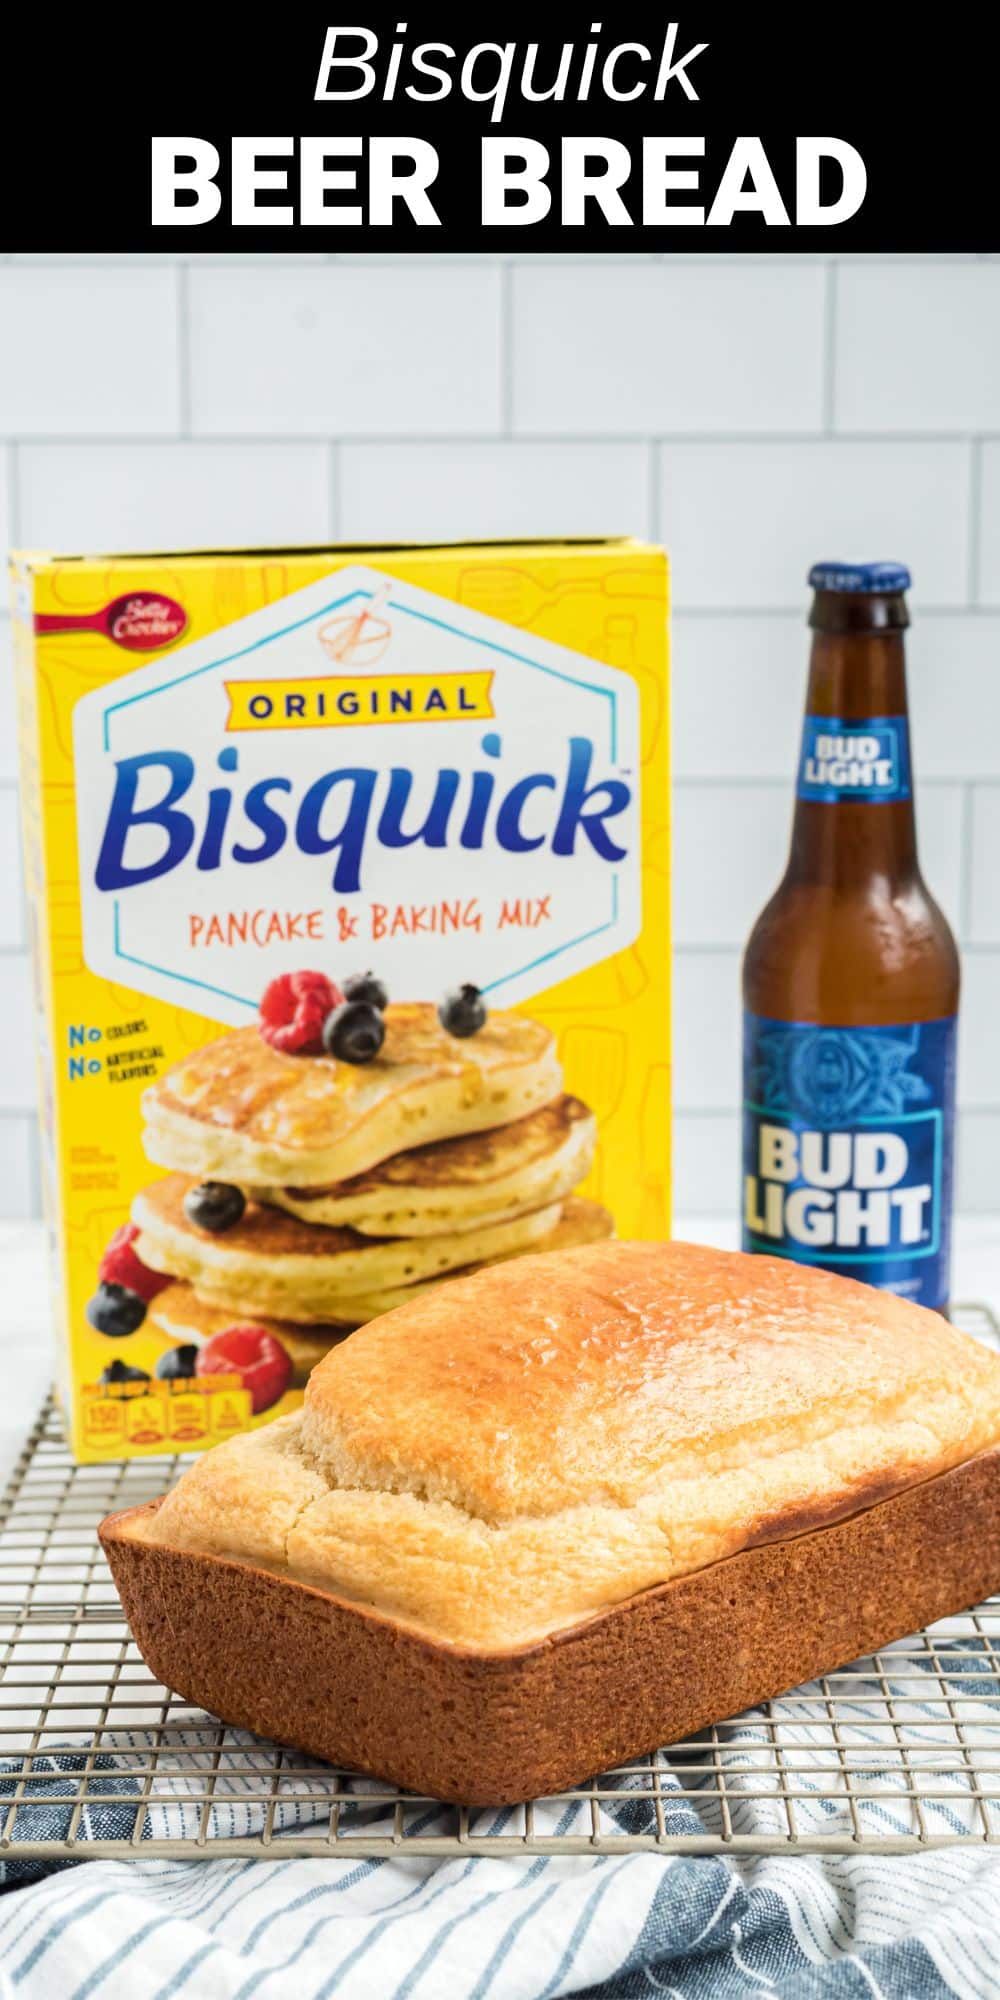 This easy homemade Bisquick Beer Bread is soft and tender on the inside with an incredible buttery crusty top! Warm and delicious, this bread is perfect to serve with dip for a hearty appetizer or along with your favorite soups or stews for a comforting meal the whole family will enjoy.